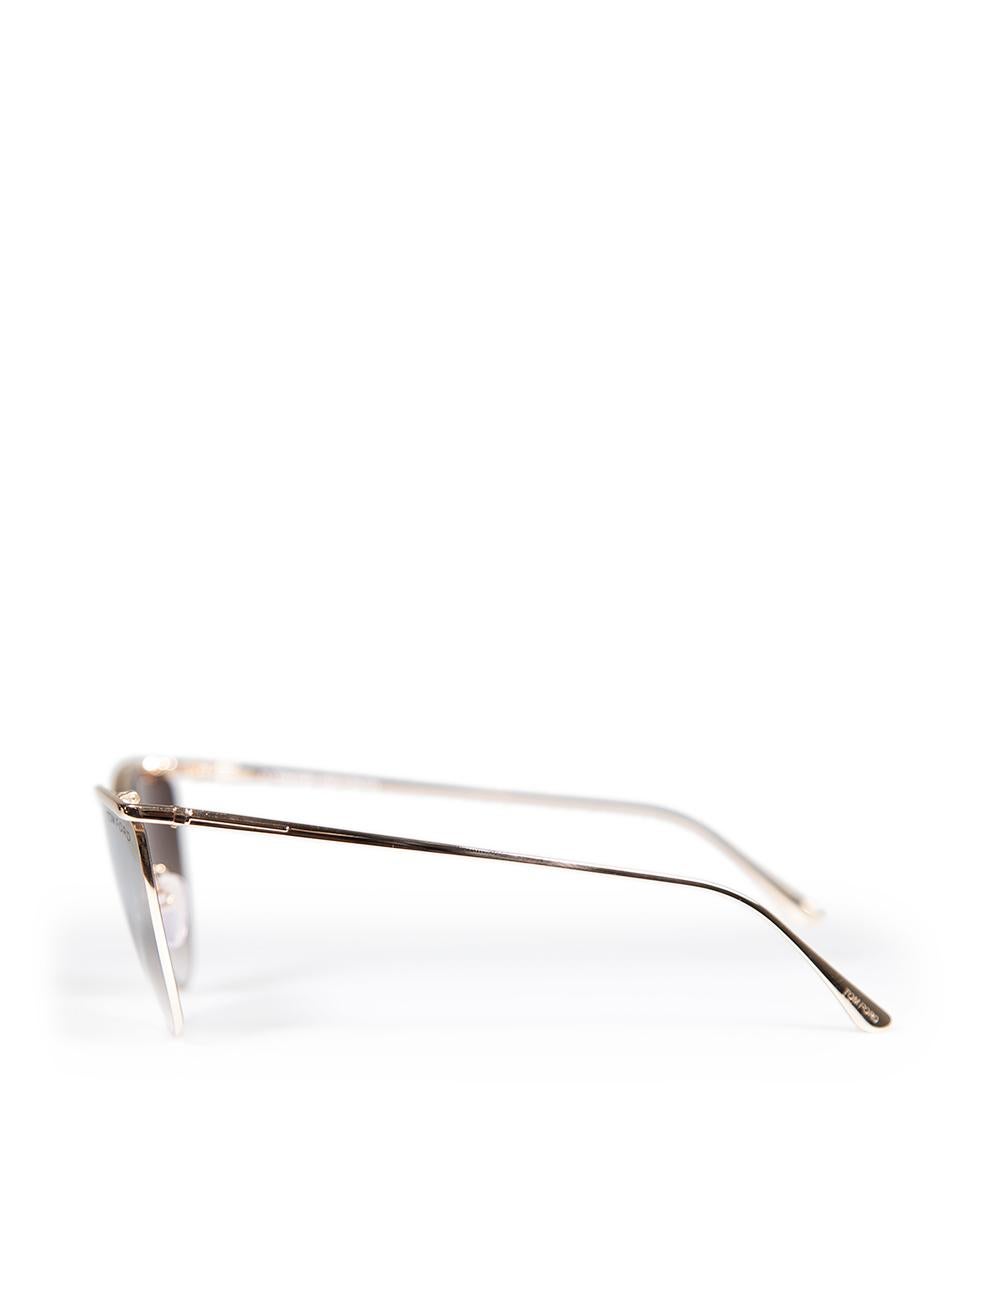 Tom Ford Shiny Rose Gold Veronica Sunglasses For Sale 1